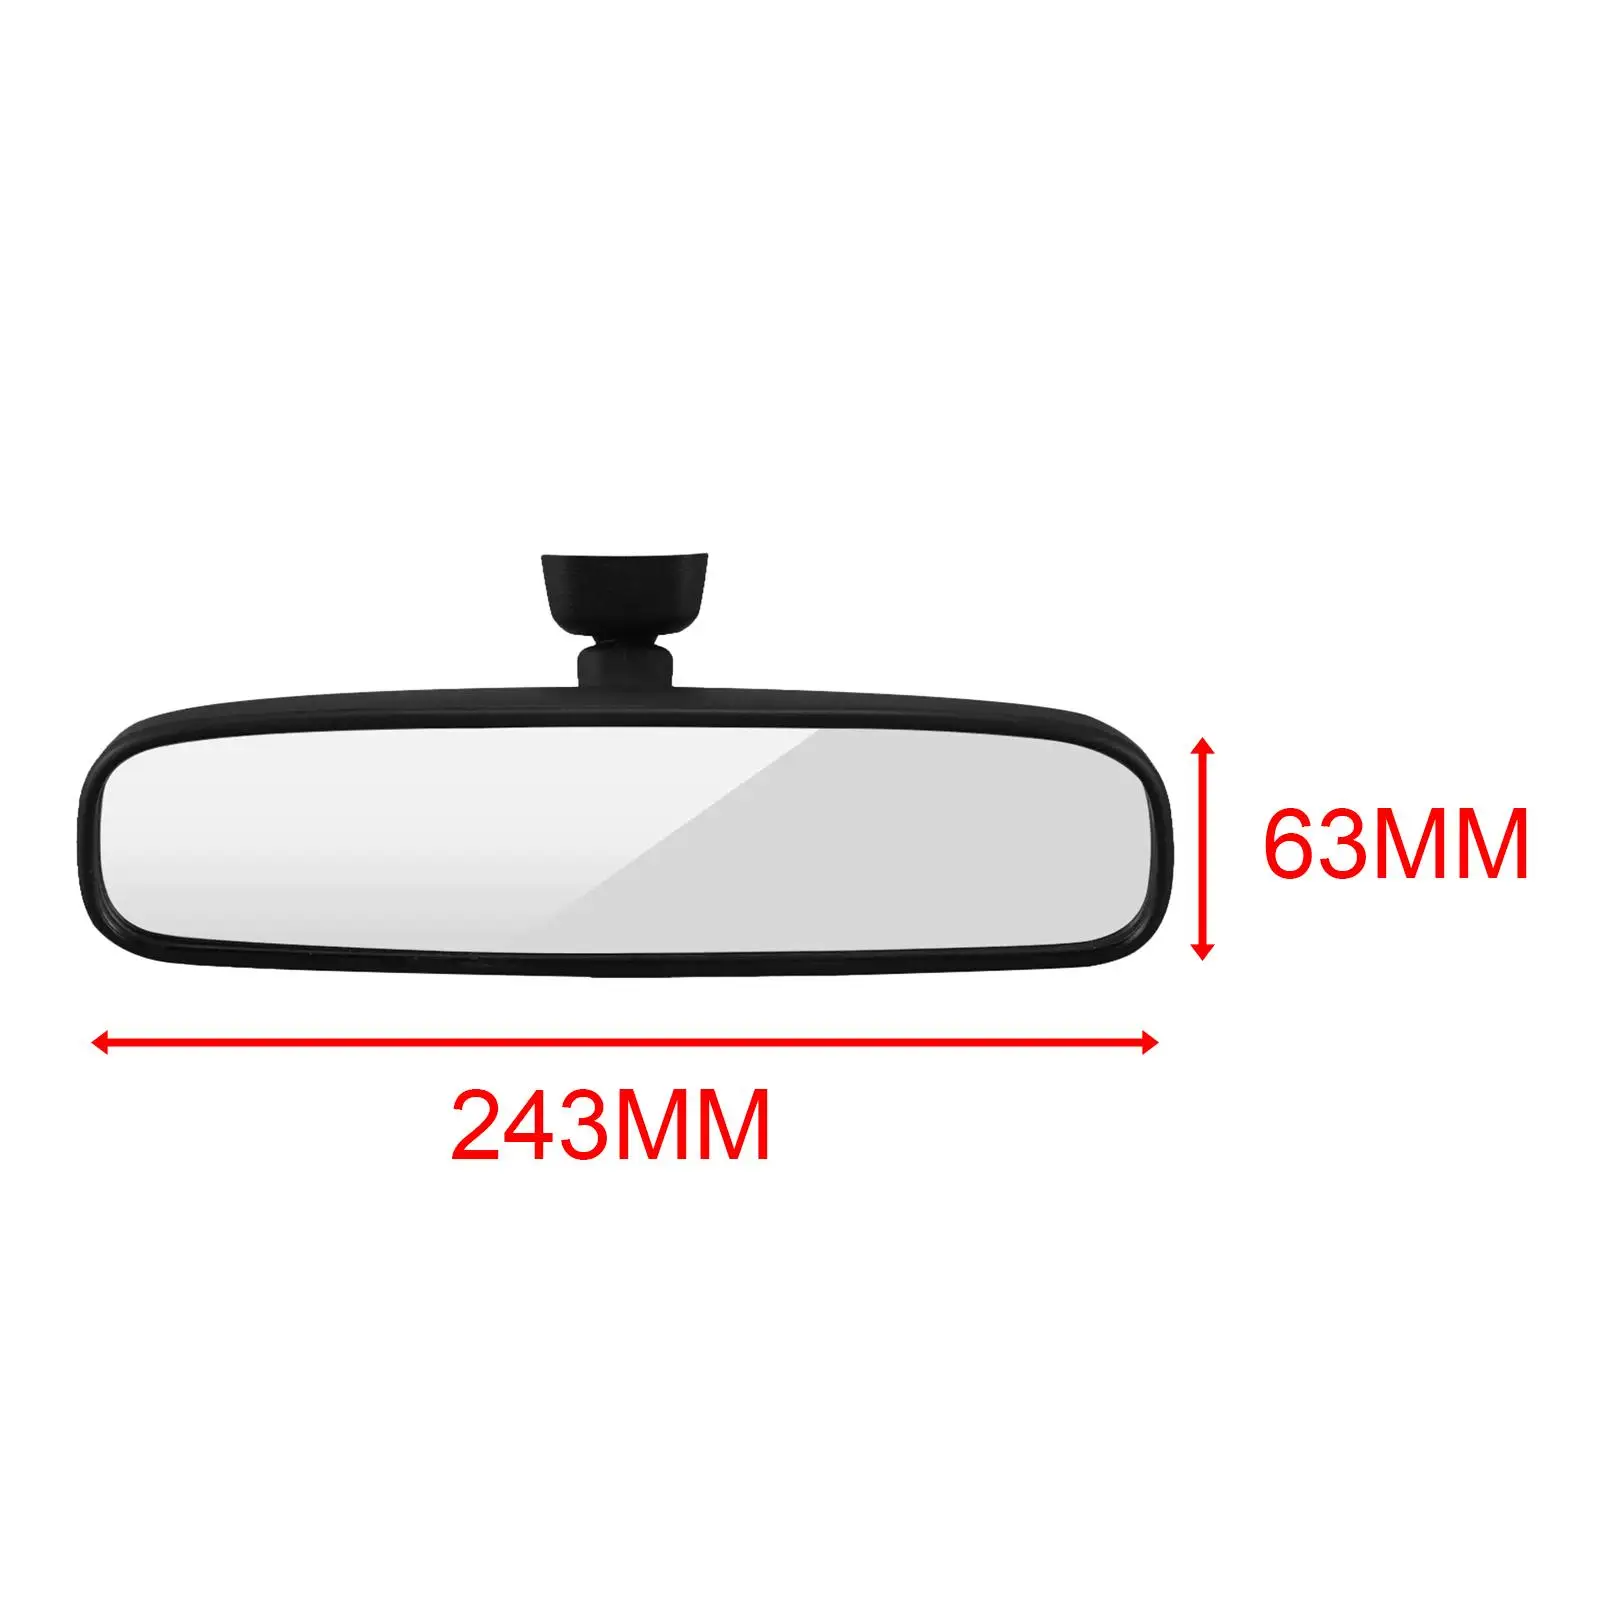 Rear View Mirror Rearview Mirror Replacement Day Night Mirror 76400-sea-004 76400-sea-305 for Honda Odyssey Fit Cr-v Accord